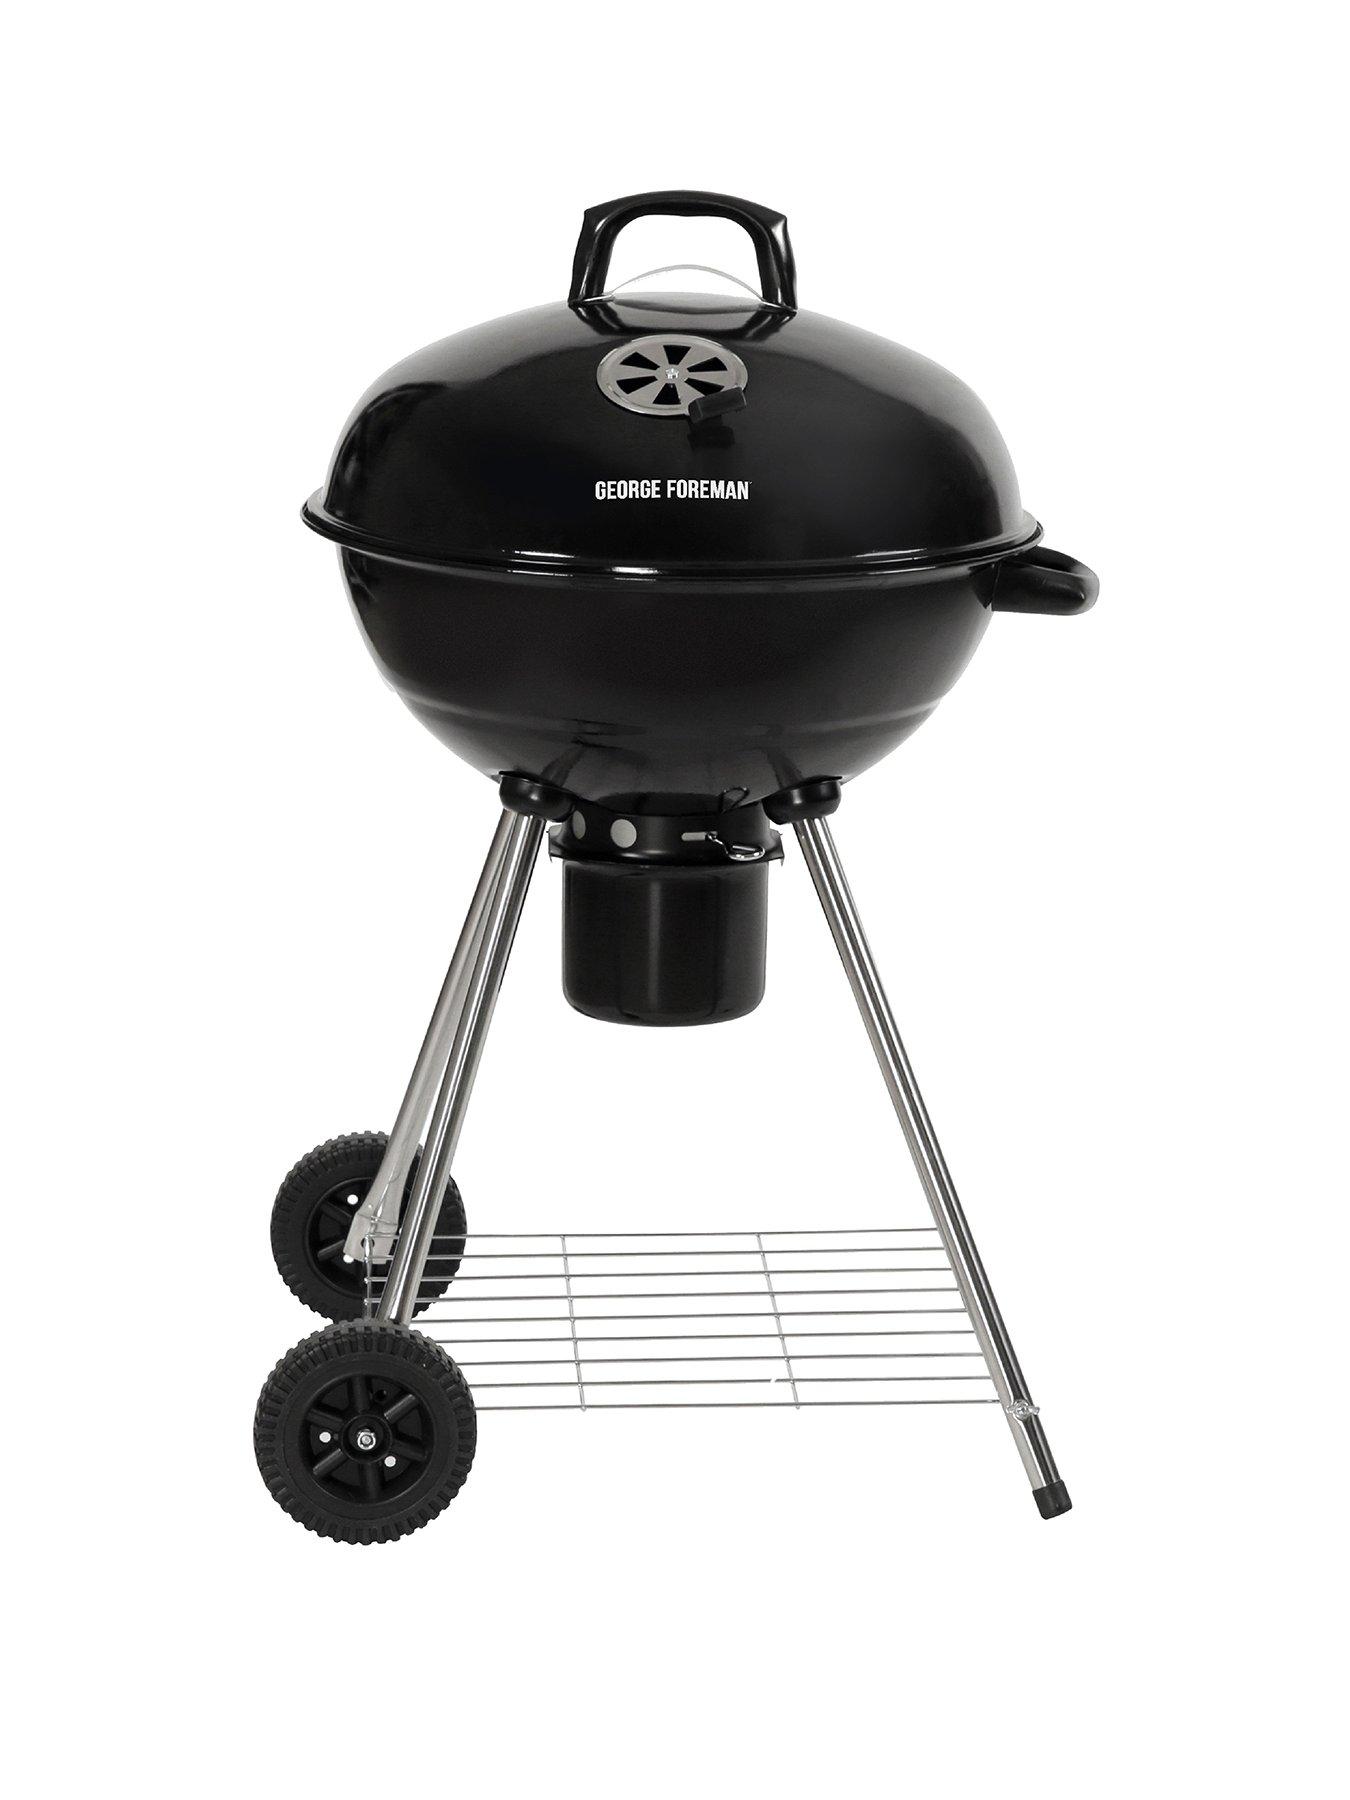 George Foreman Gfktbbq Kettle Charcoal Bbq 20-Inch, Black